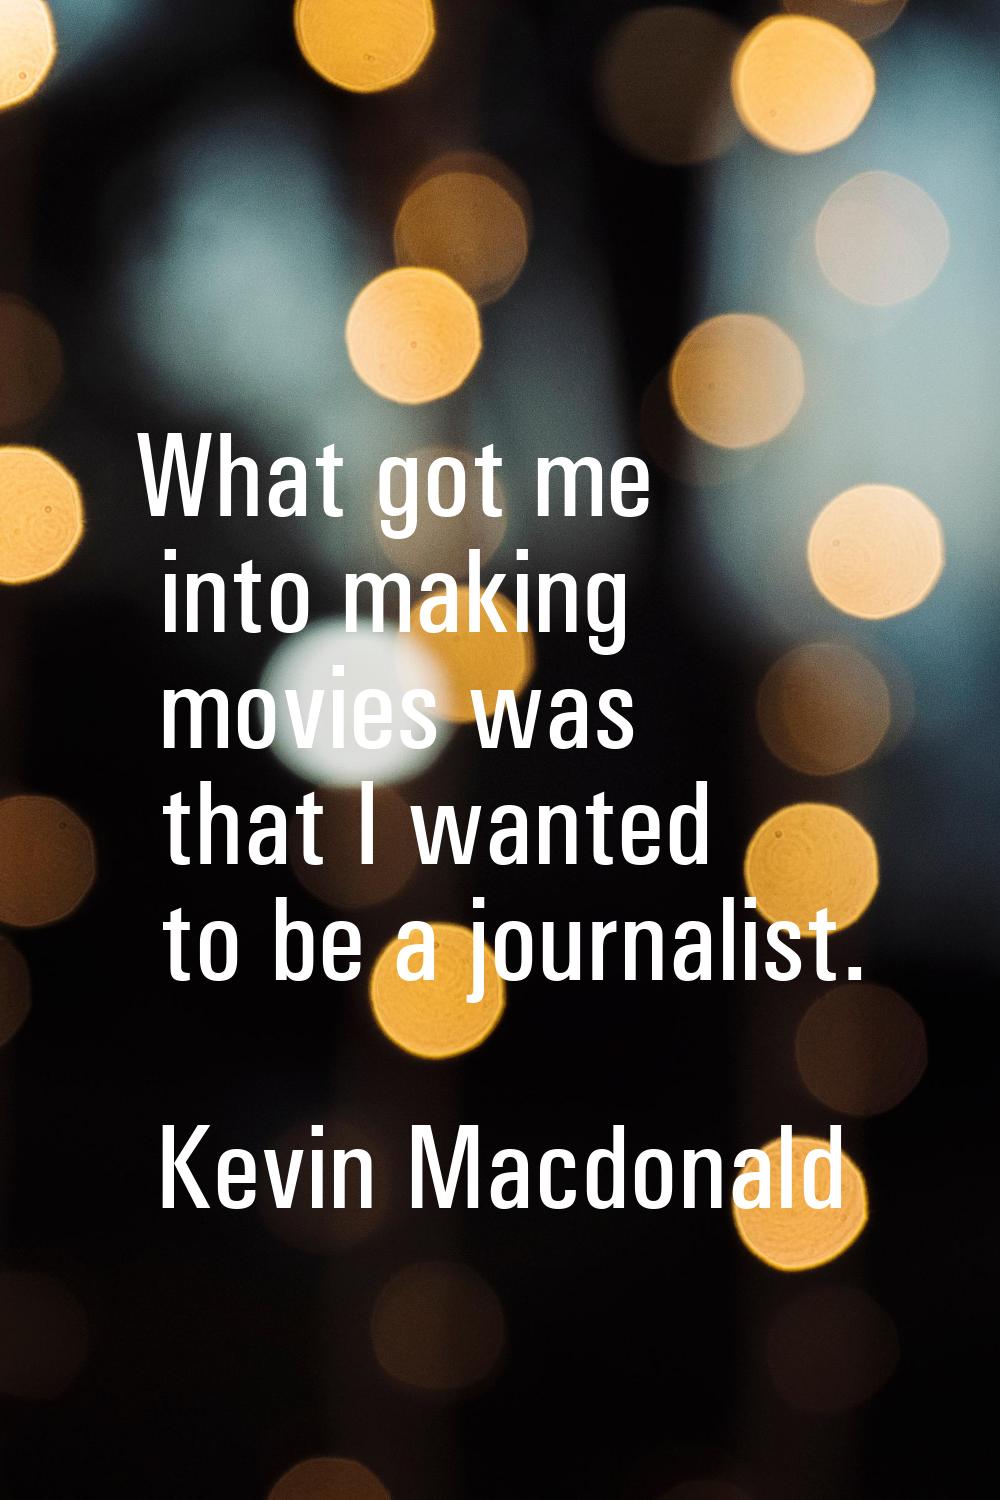 What got me into making movies was that I wanted to be a journalist.